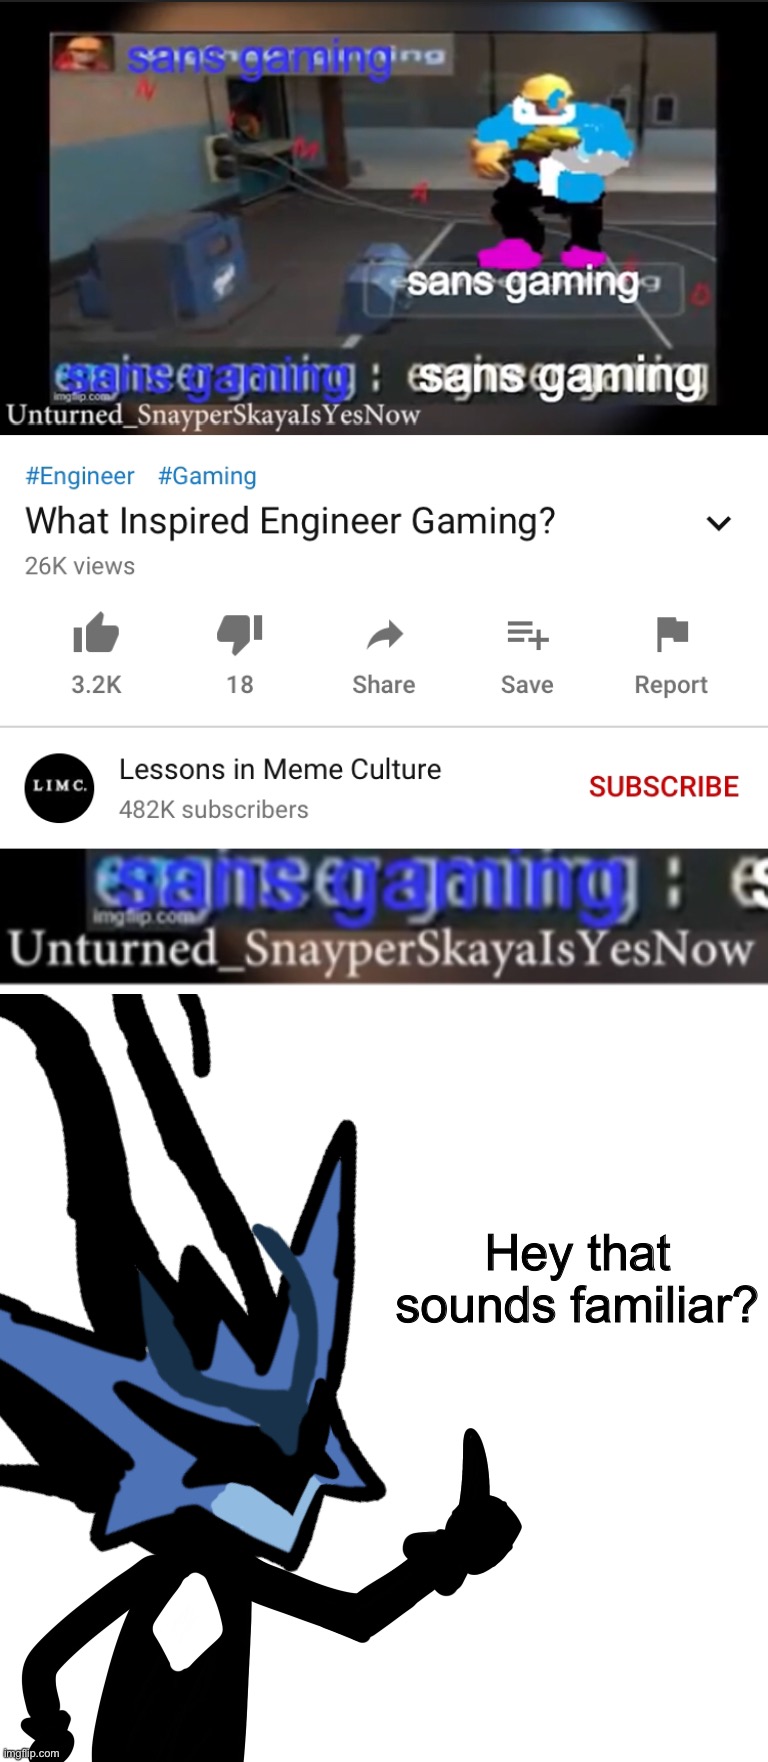 I swear it was a imgflip user! | Hey that sounds familiar? | image tagged in memes,funny,imgflip users,sans,gaming,tf2 engineer | made w/ Imgflip meme maker